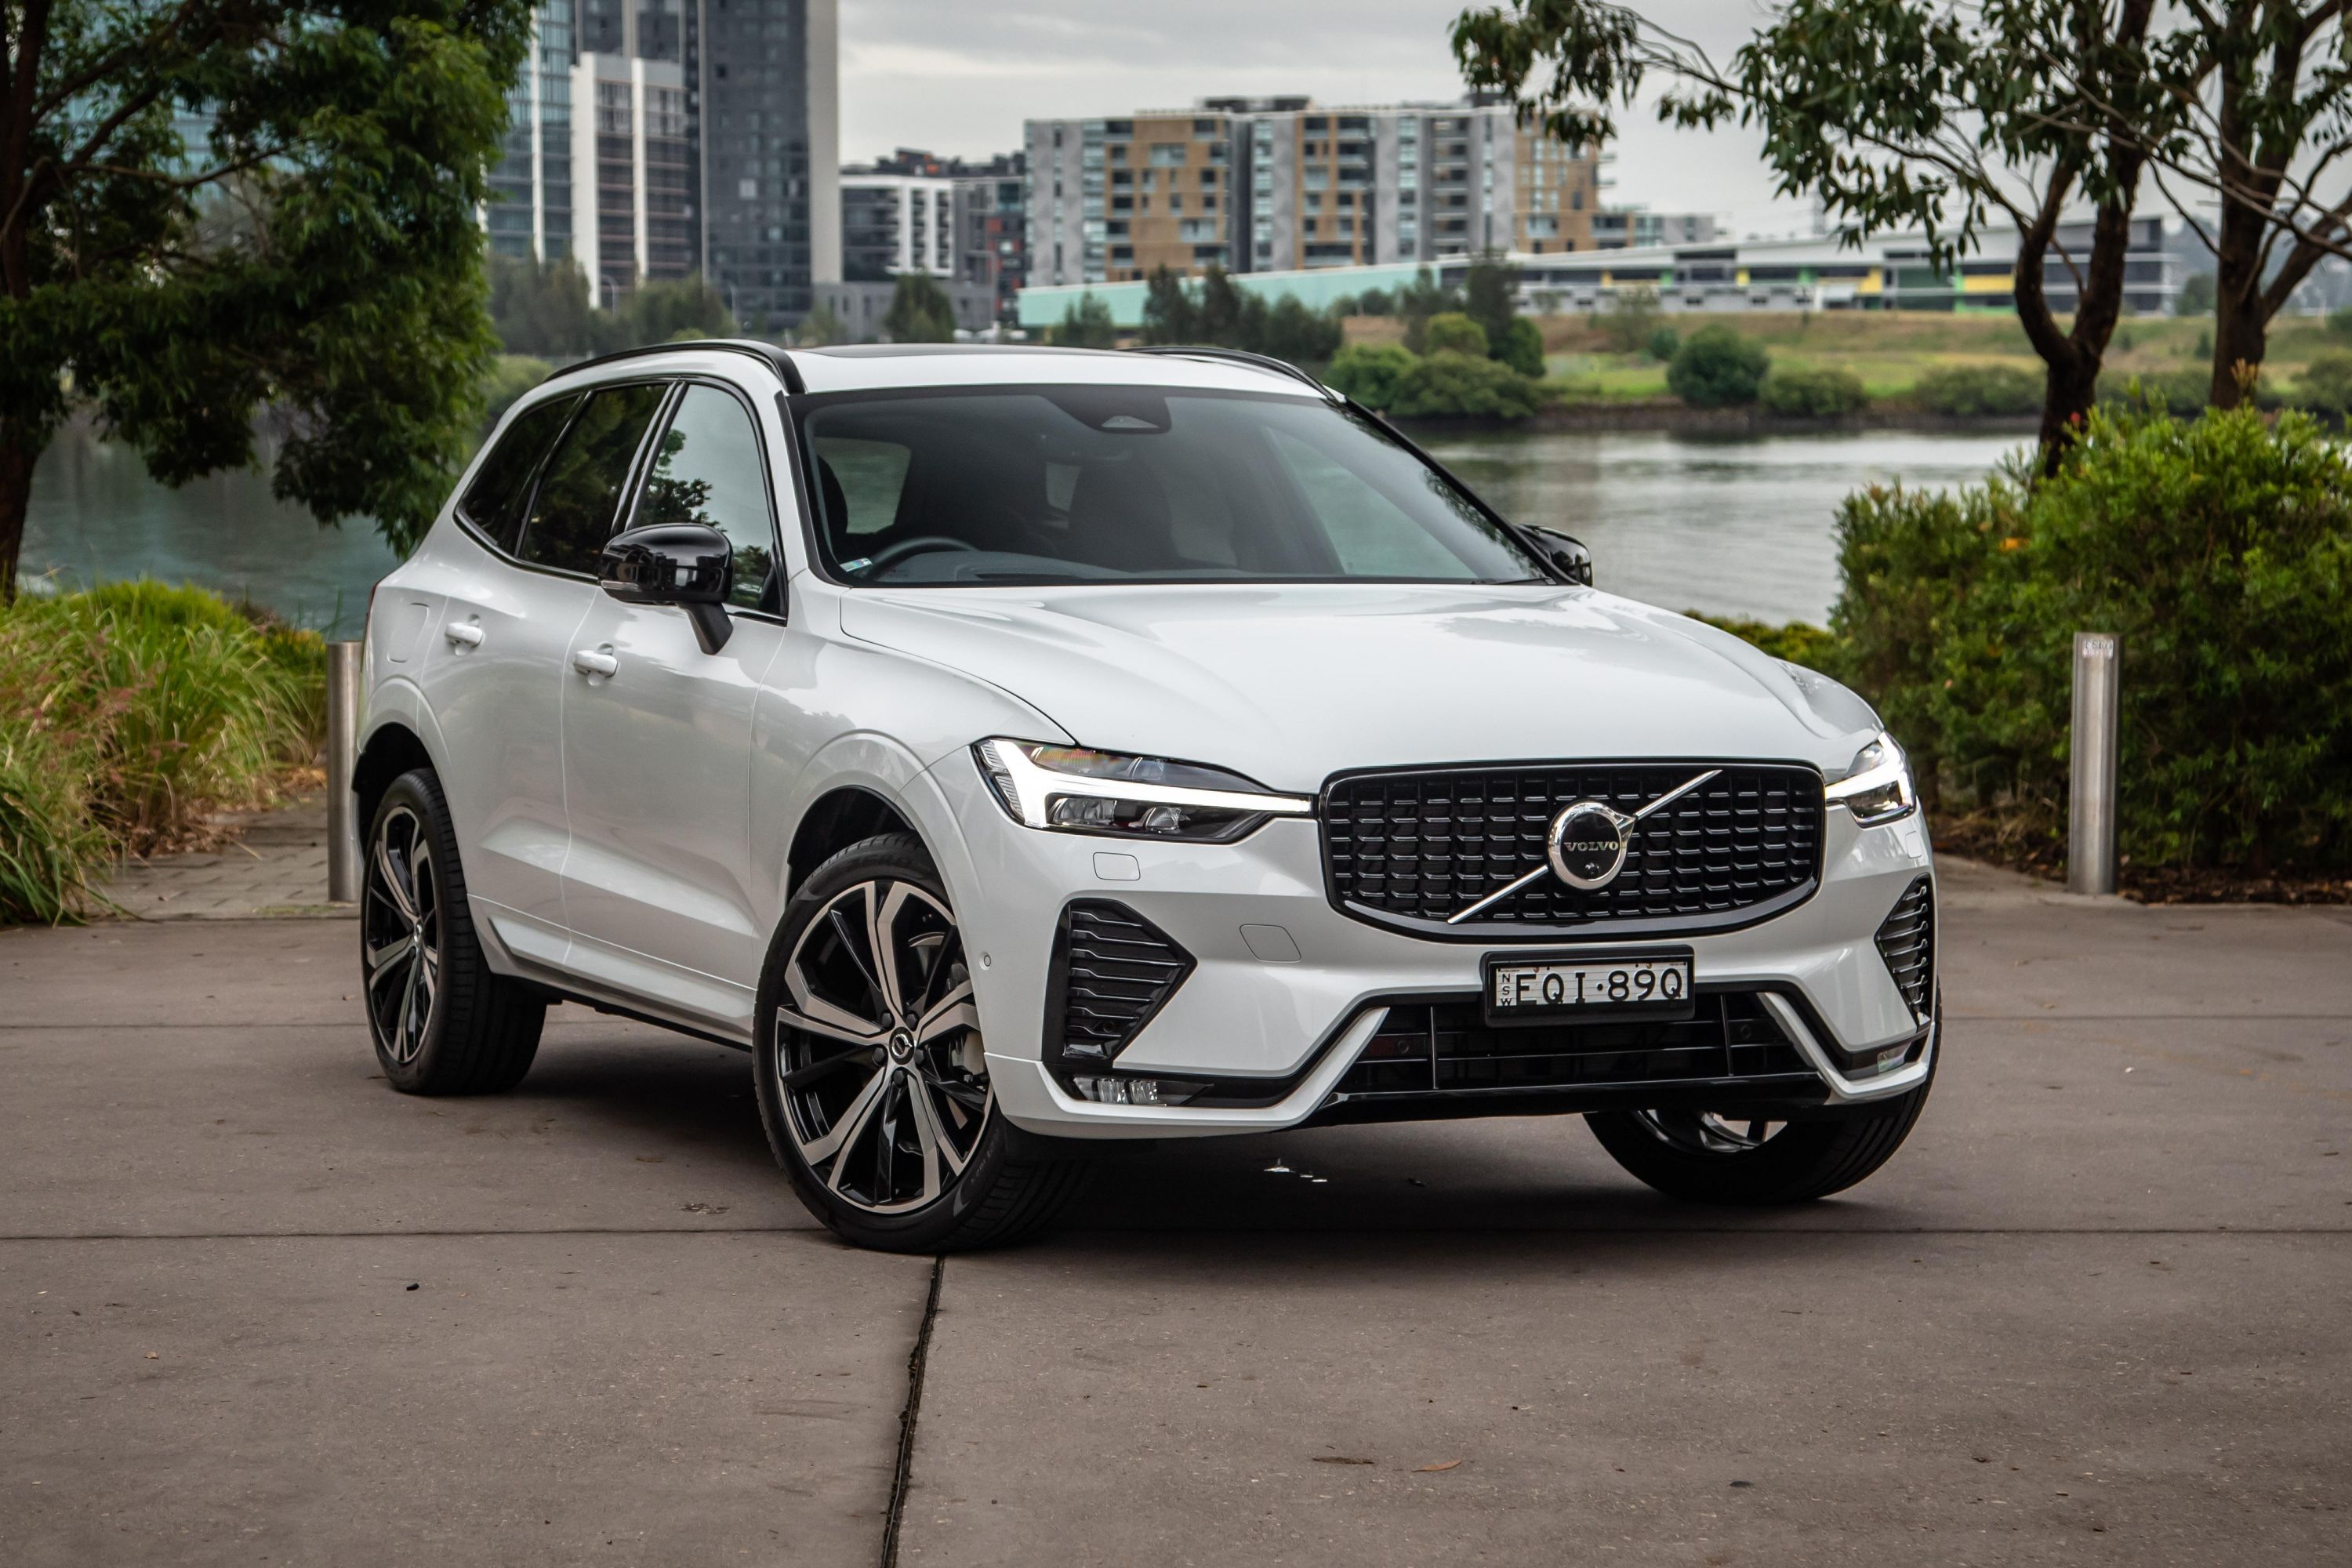 2022 Volvo XC60 First Drive Review: Mild Not Wild